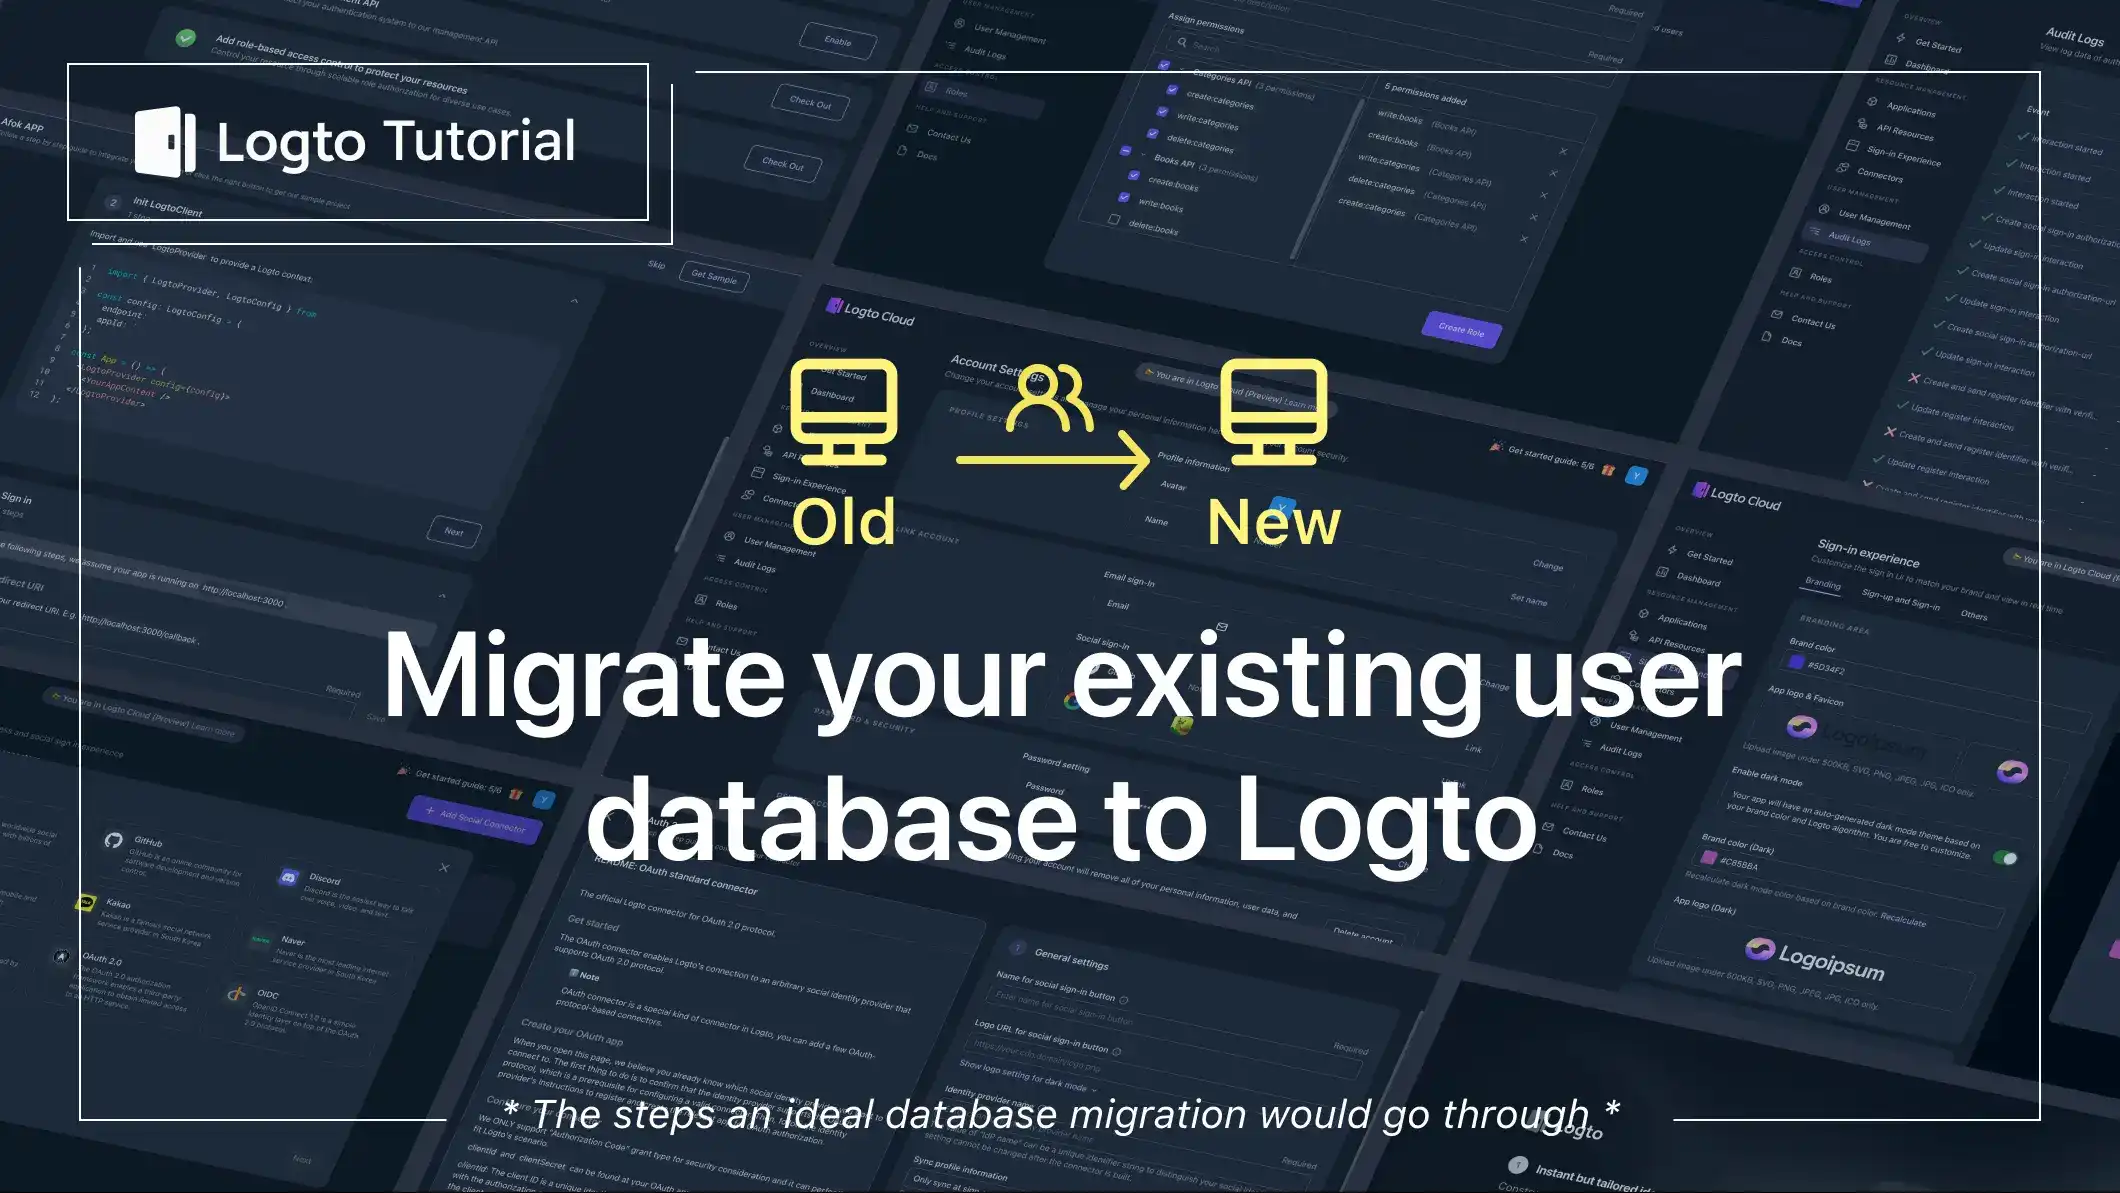 A general guideline to migrate your existing user database to Logto